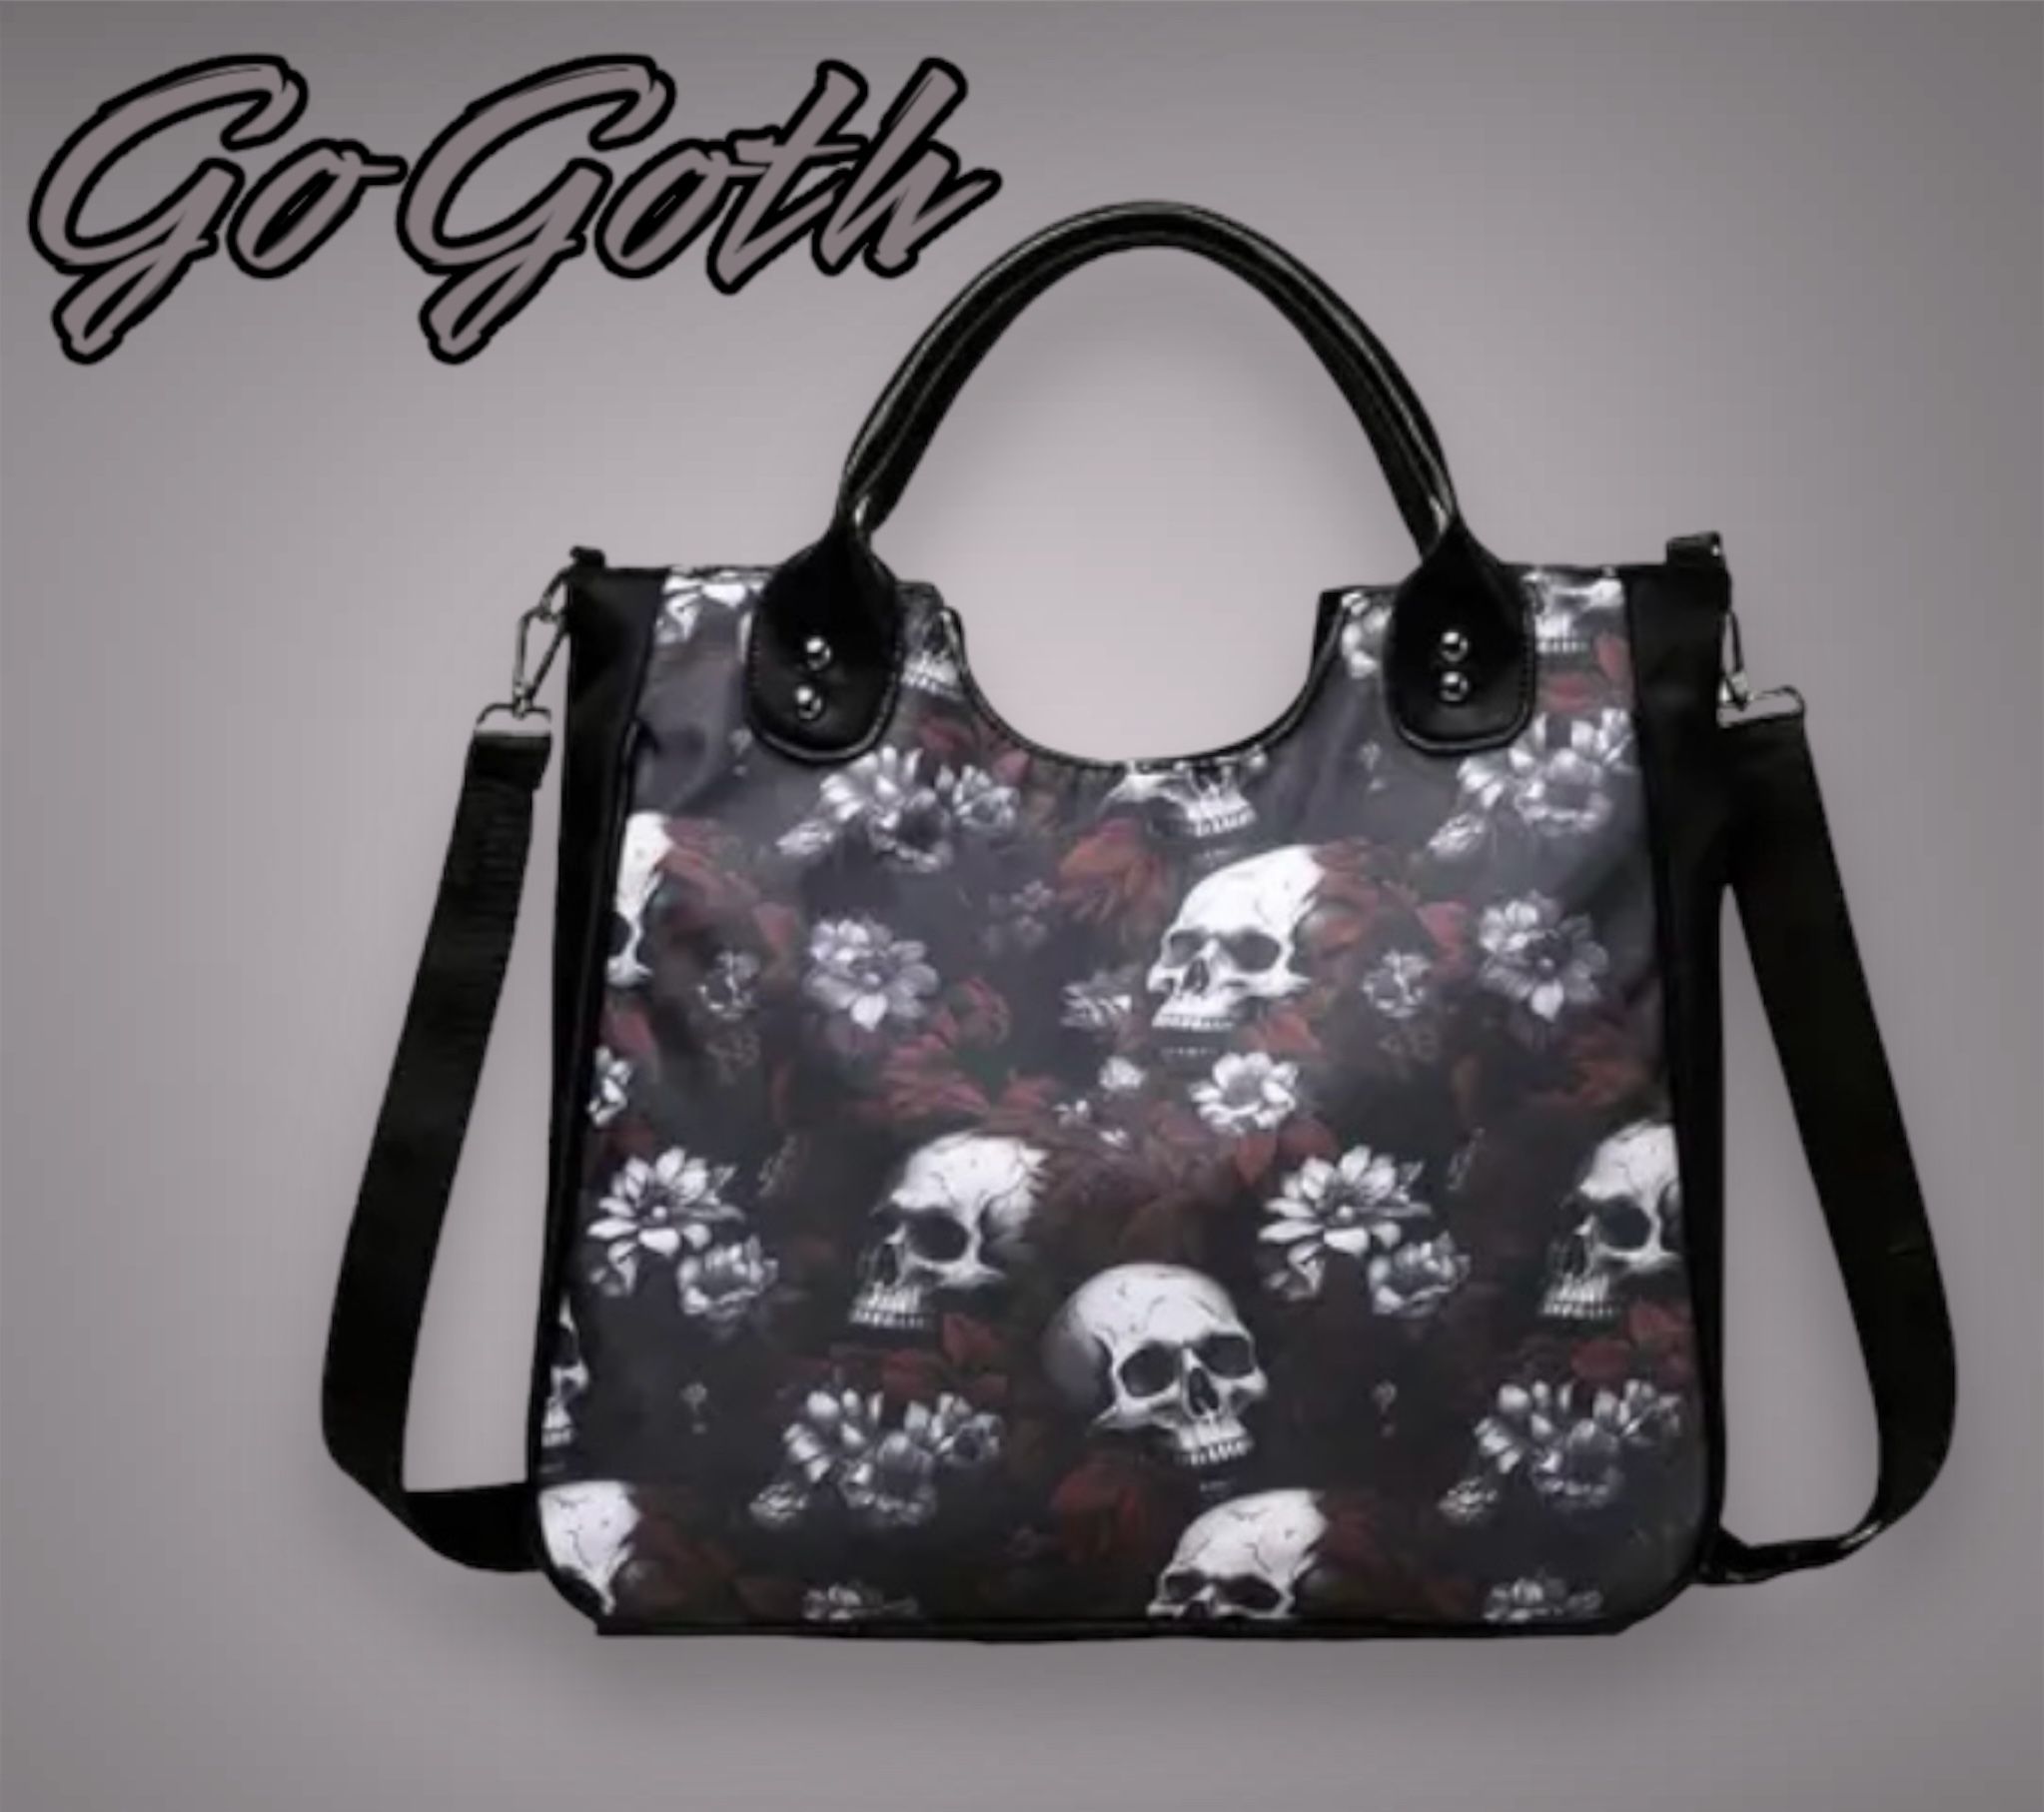 Gothic Skull Floral Print Tote Bag / Purse.